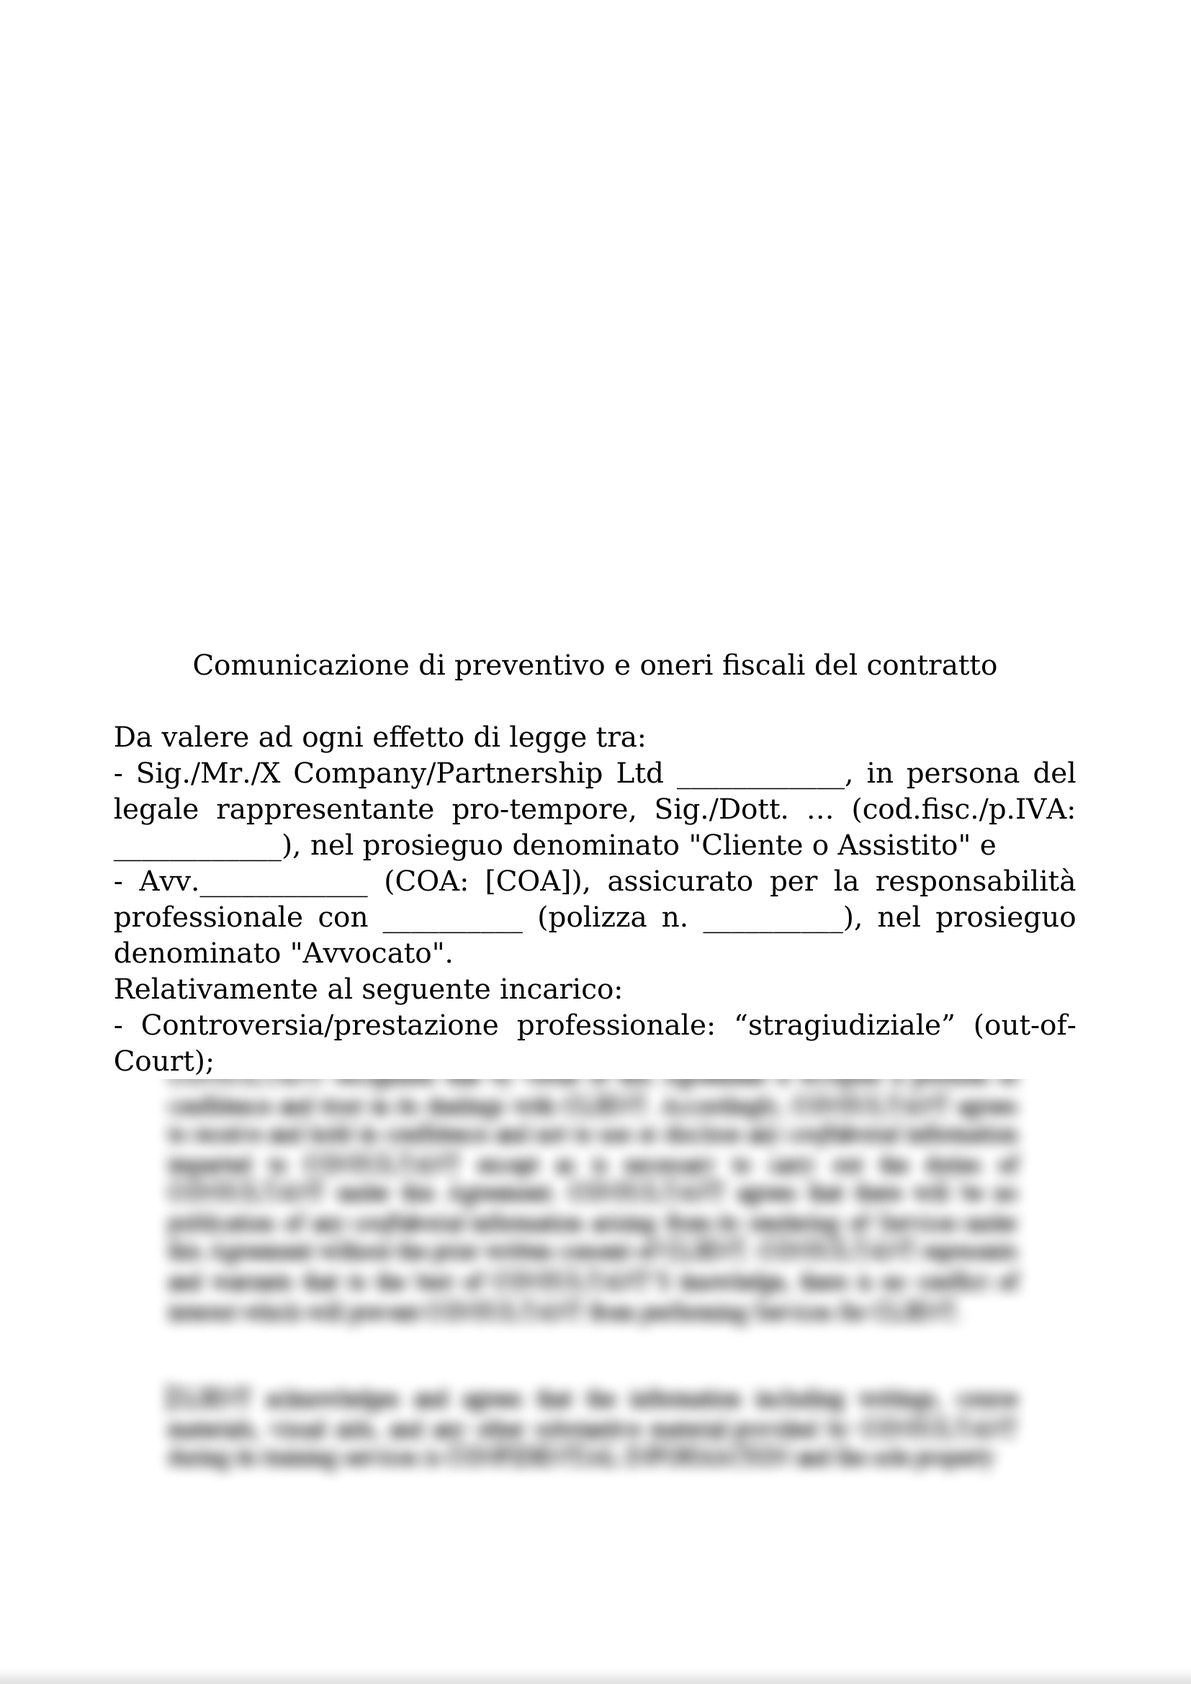 INTELLECTUAL WORK AGREEMENT FOR OUT-OF-COURT ACTIVITIES AND ATTACHMENTS 1 (PRIVACY); 2 (ANTI-MONEY LAUNDERING); AND 3 FEE QUOTE / CONTRATTO D’OPERA INTELLETTUALE STRAGIUDIZIALE-11